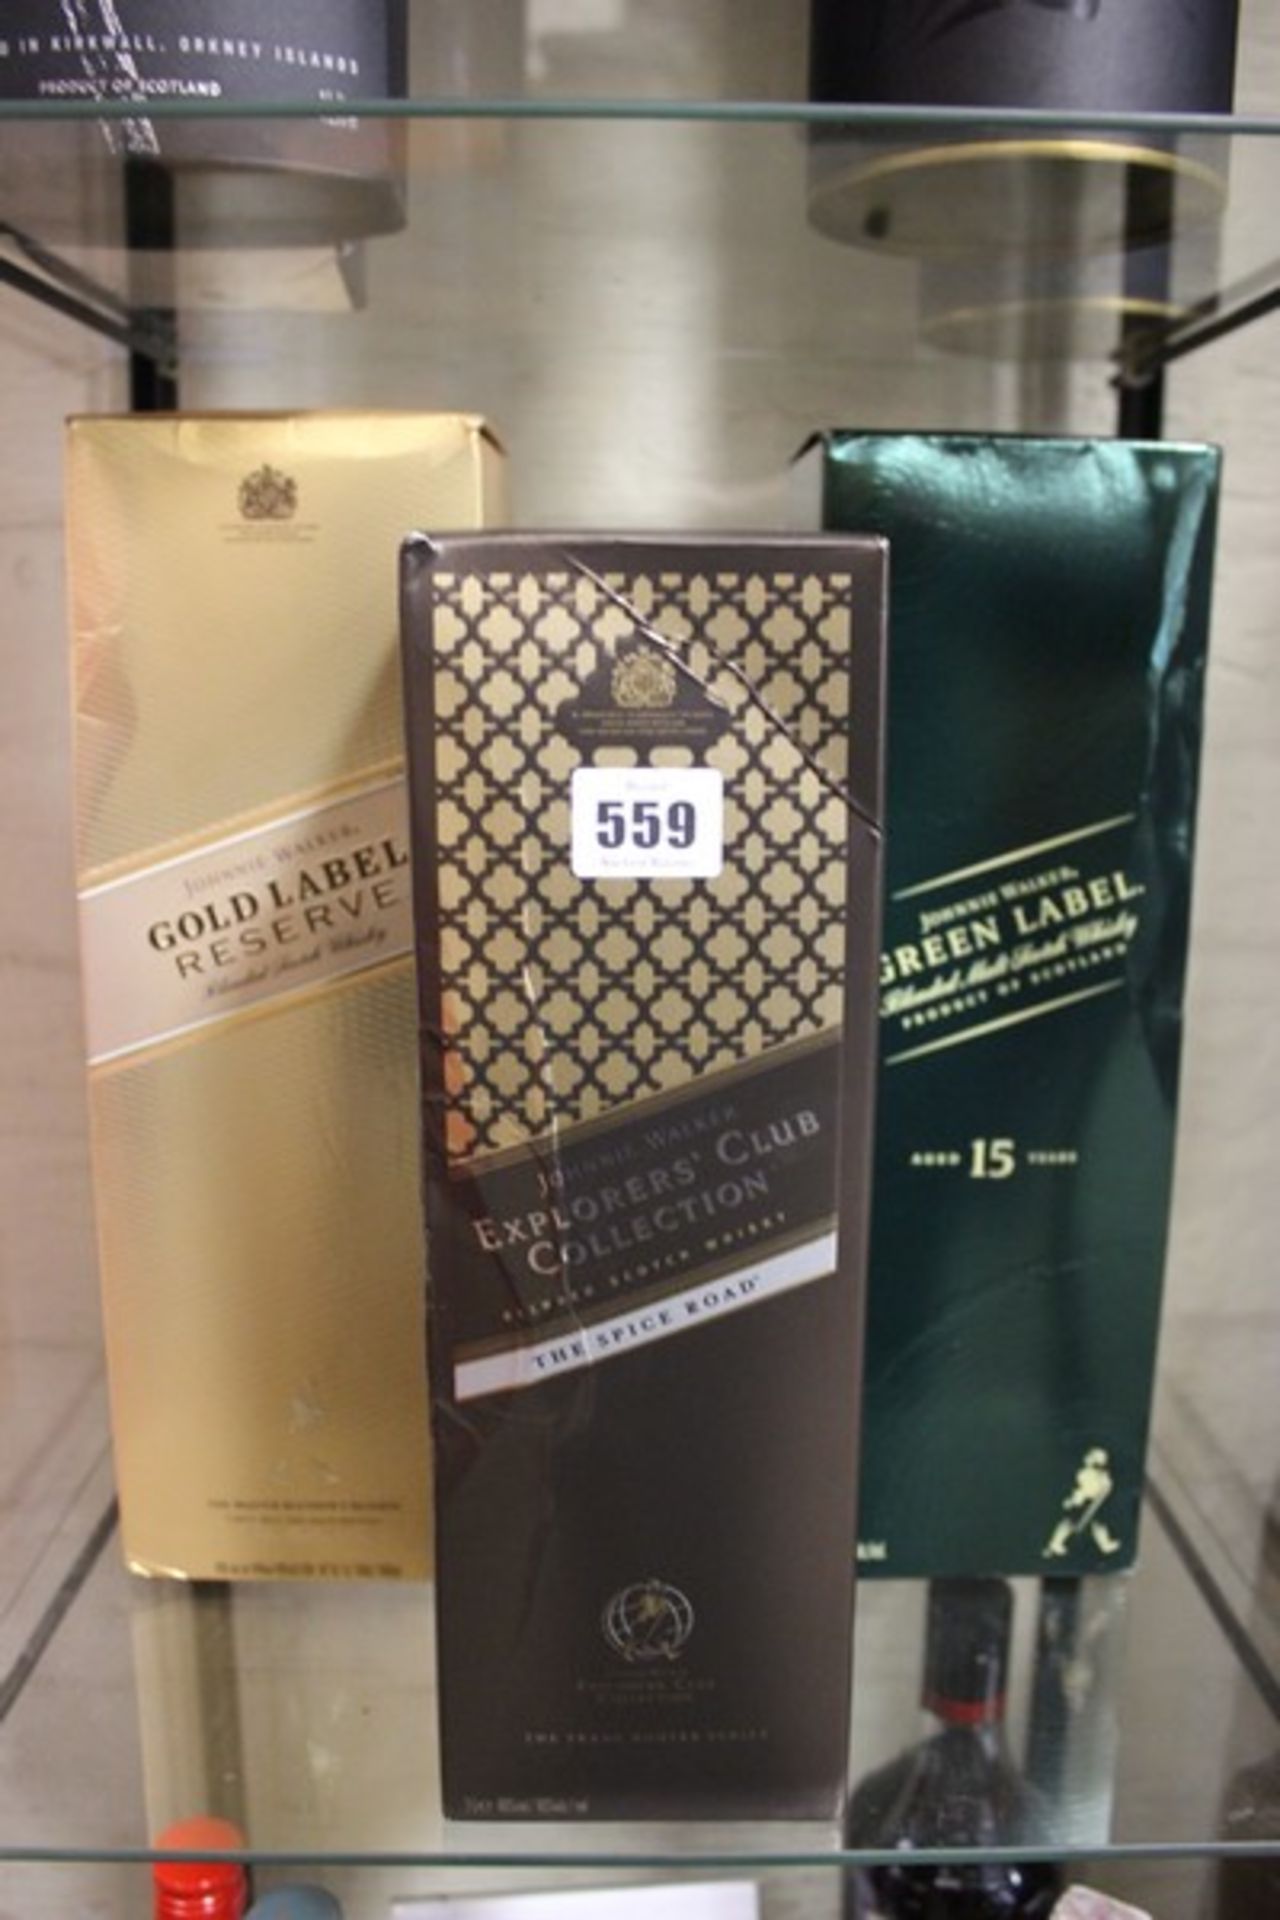 Three Johnnie Walker whisky; Gold Label Reserve (1ltr), Green Label (1ltr) and Explorer's Club